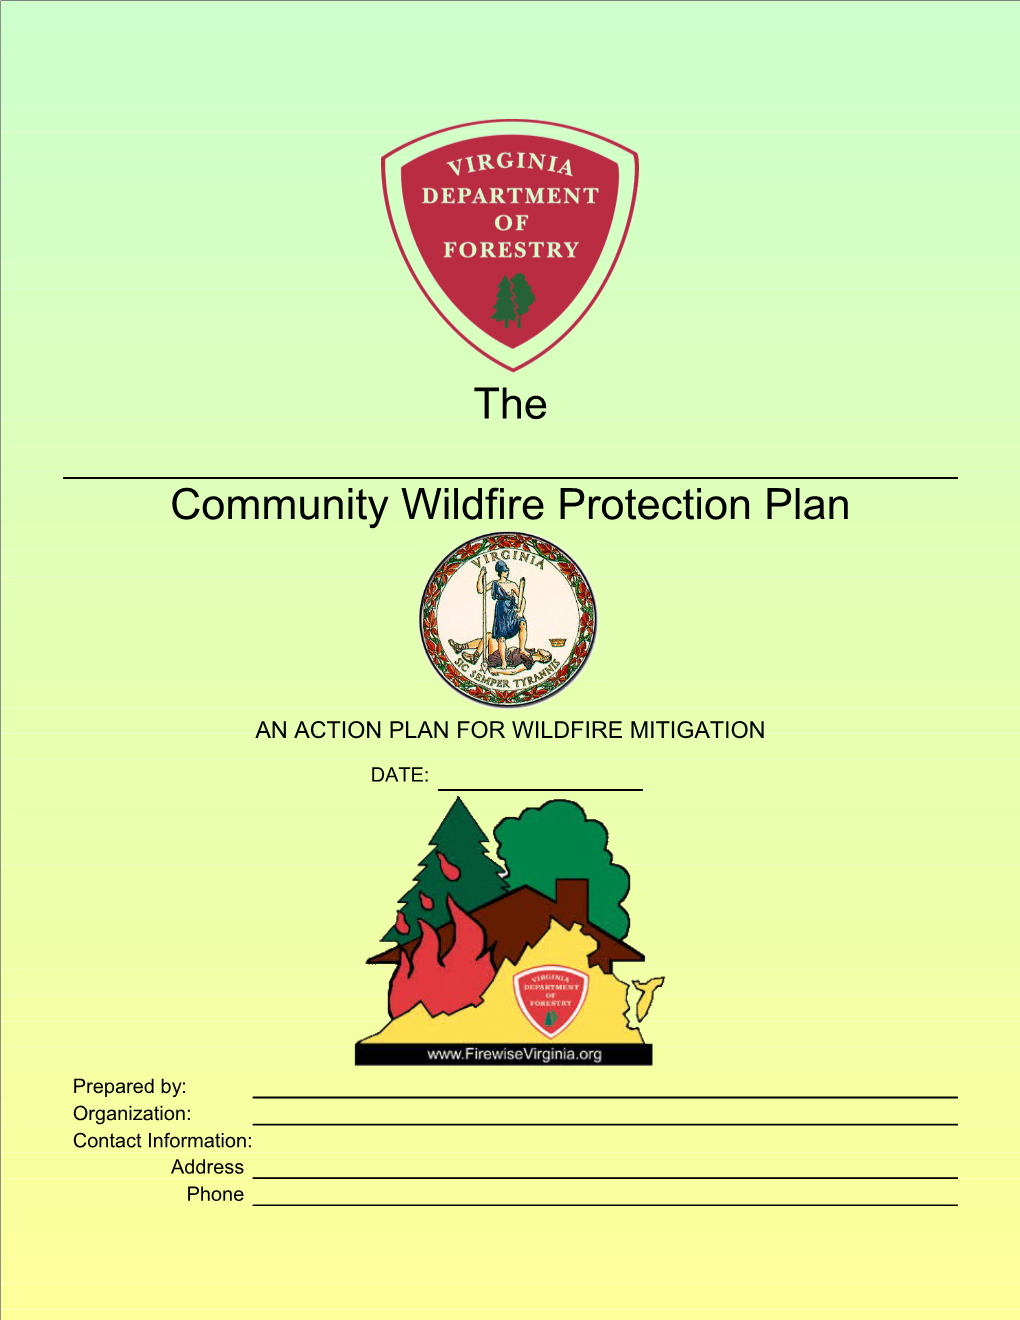 Wildfire Protection Plan: an Action Plan for Wildfire Mitigation 2